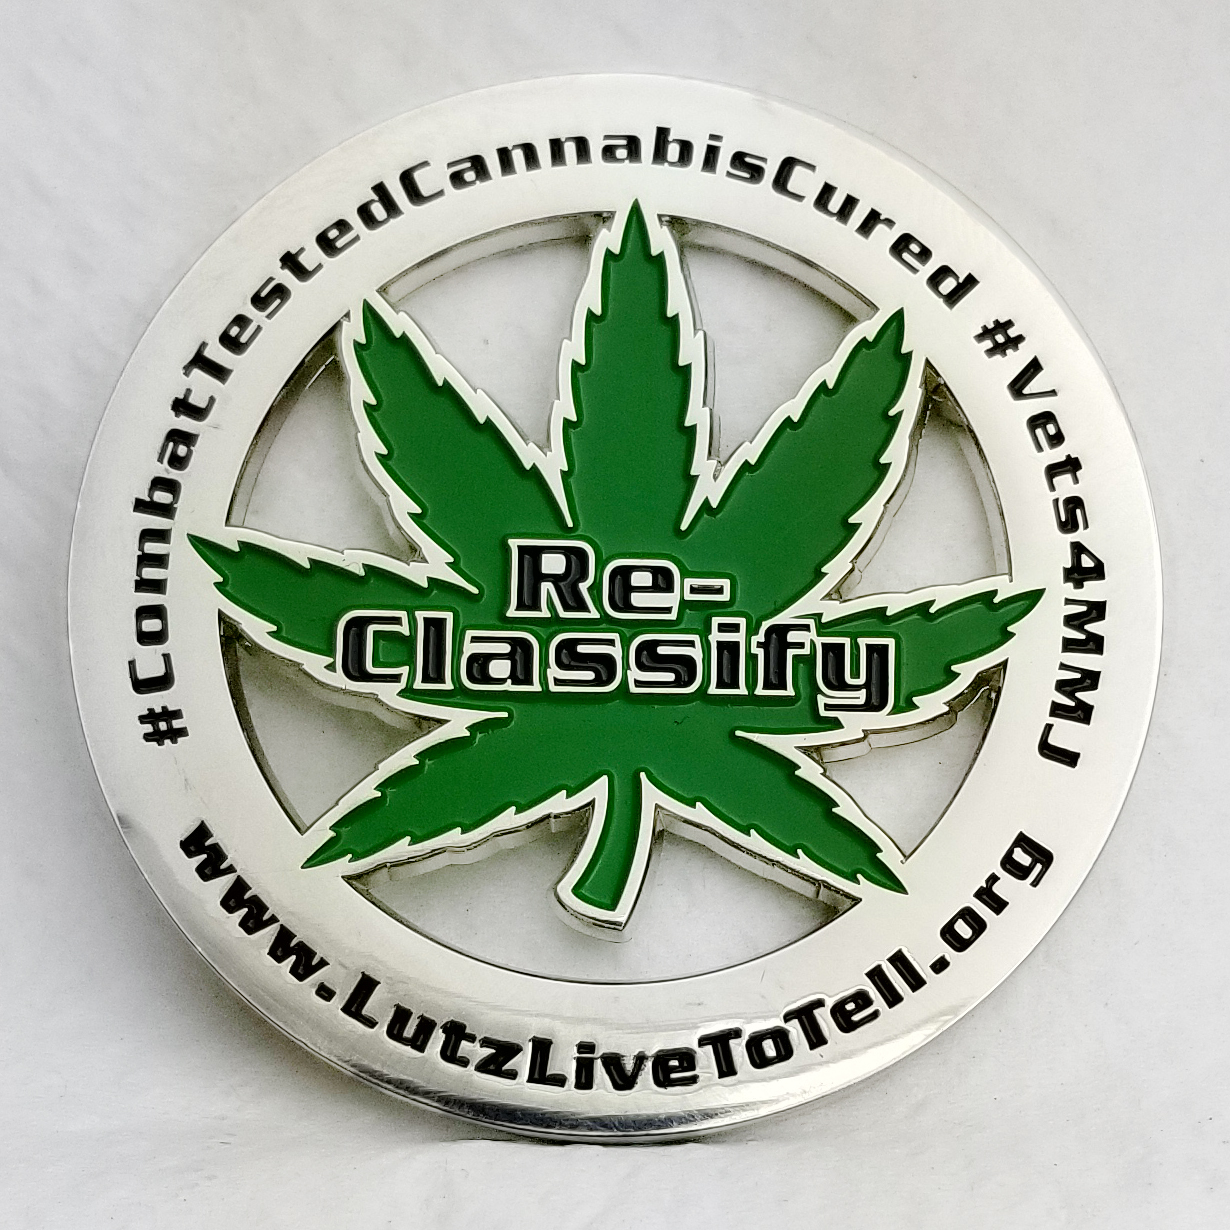 Reclassify Cannabis Challenge Coin